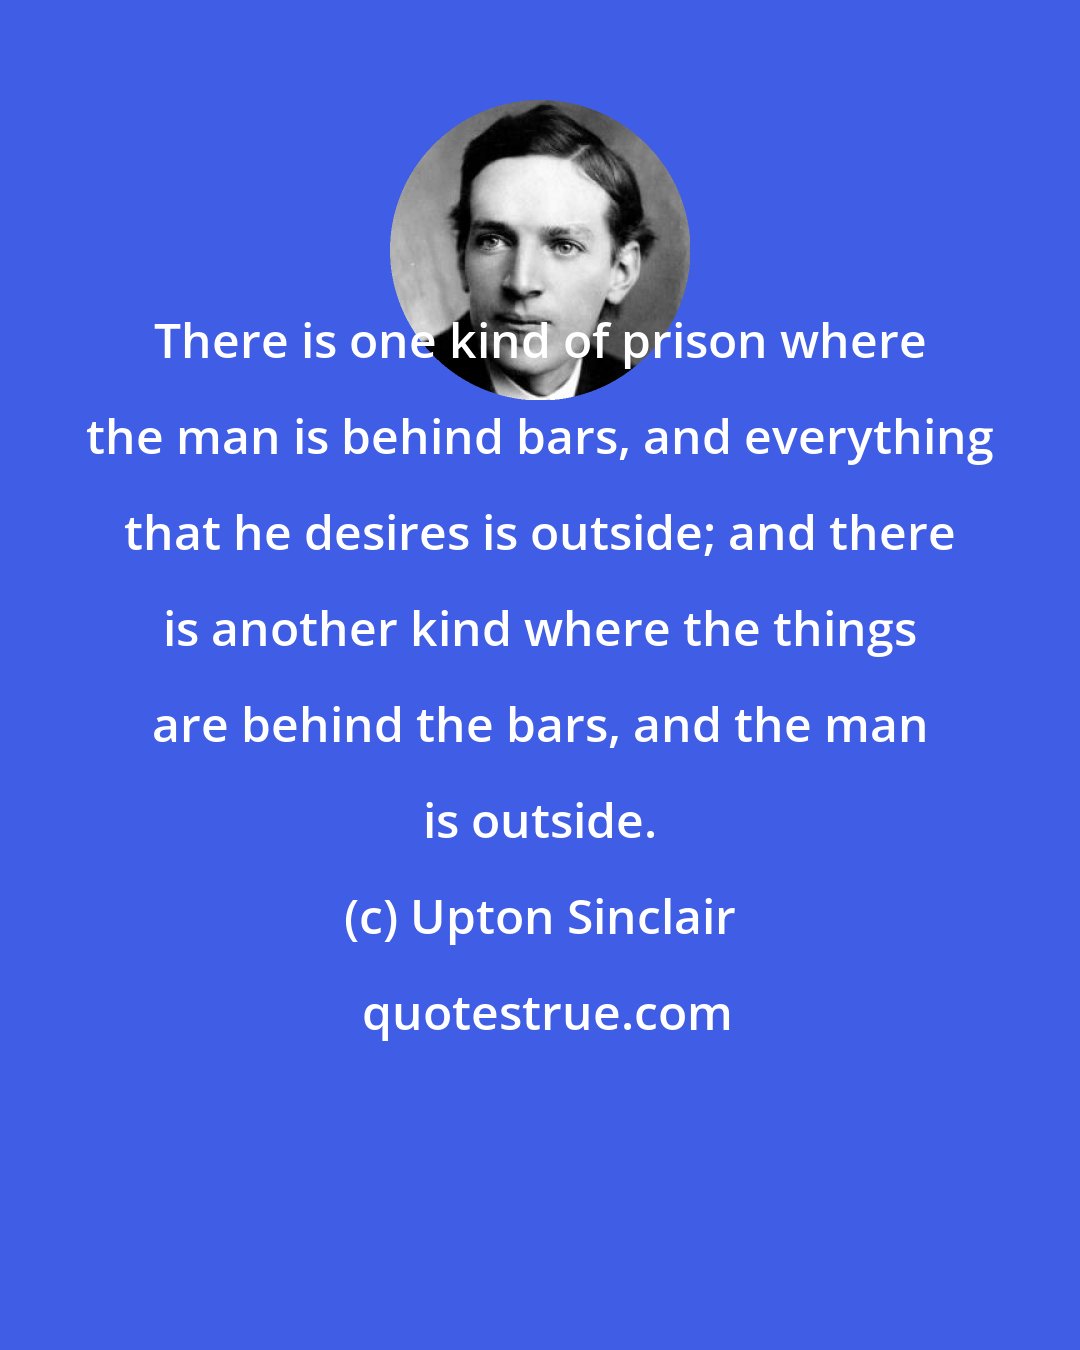 Upton Sinclair: There is one kind of prison where the man is behind bars, and everything that he desires is outside; and there is another kind where the things are behind the bars, and the man is outside.